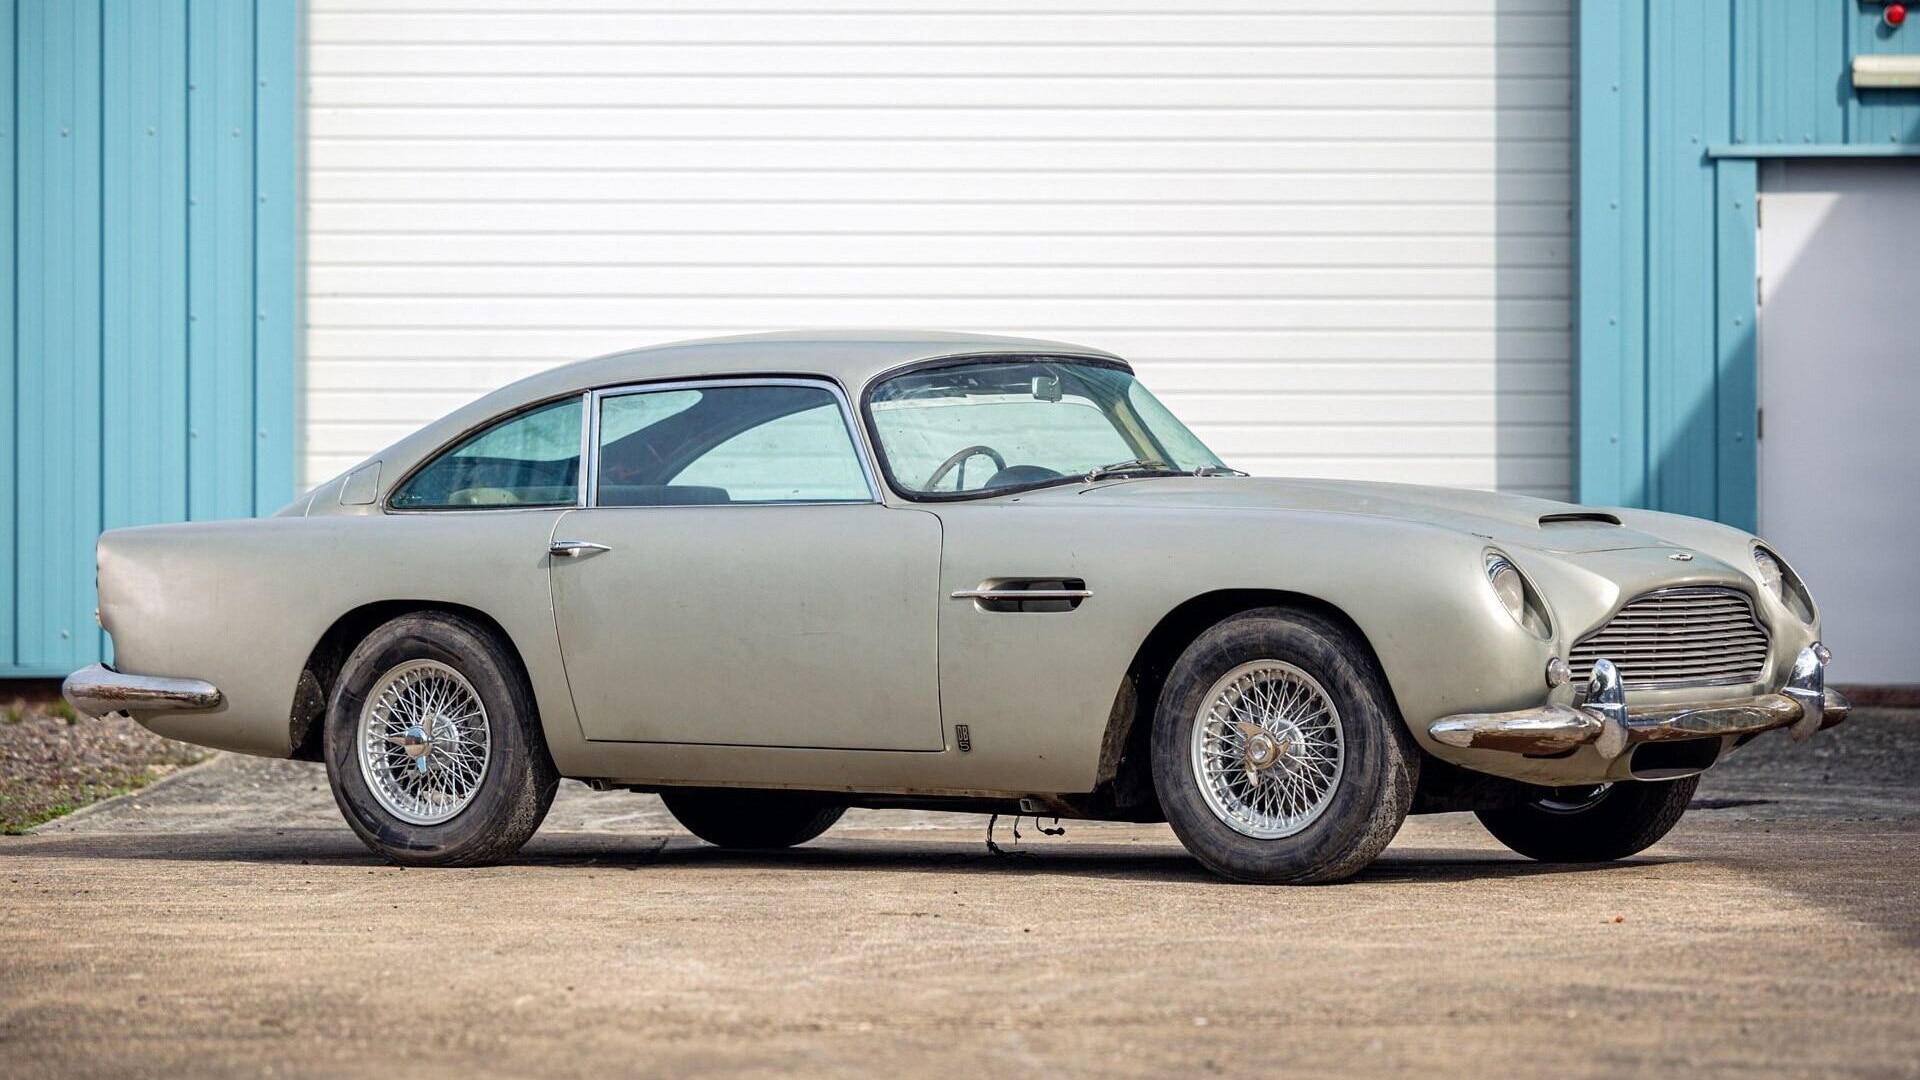 1963 Aston Martin DB5 bearing chassis no. 1316/R - Photo credit: RM Sotheby's